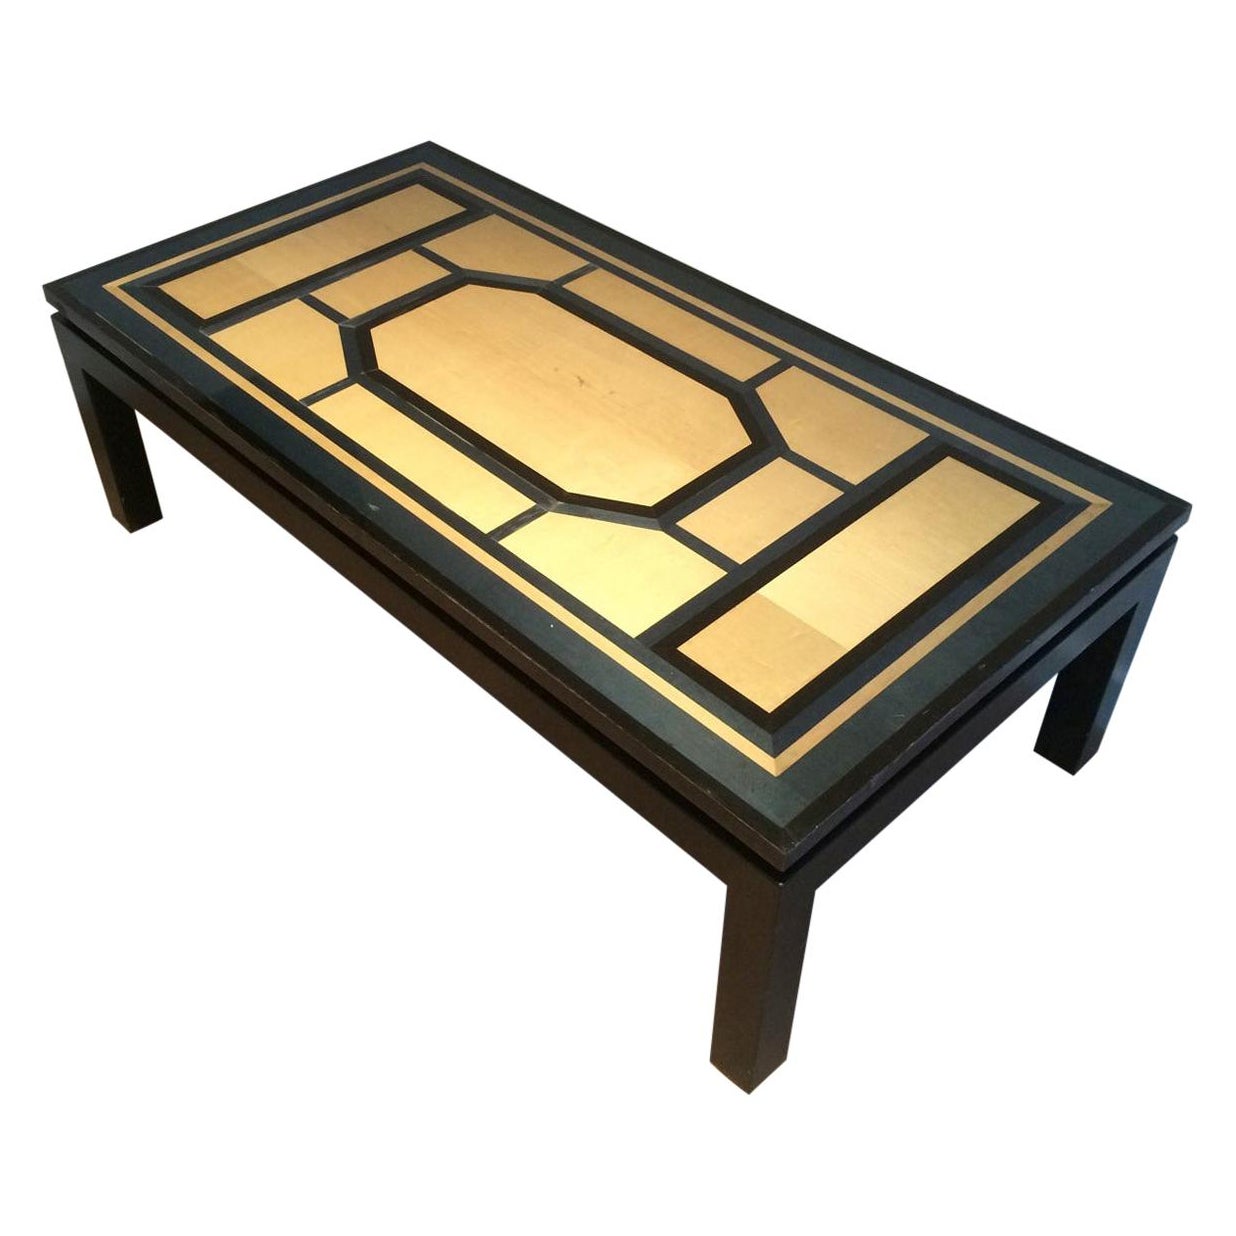 Interesting Lacquer Coffee Table Stamped "Br", circa 1960 For Sale